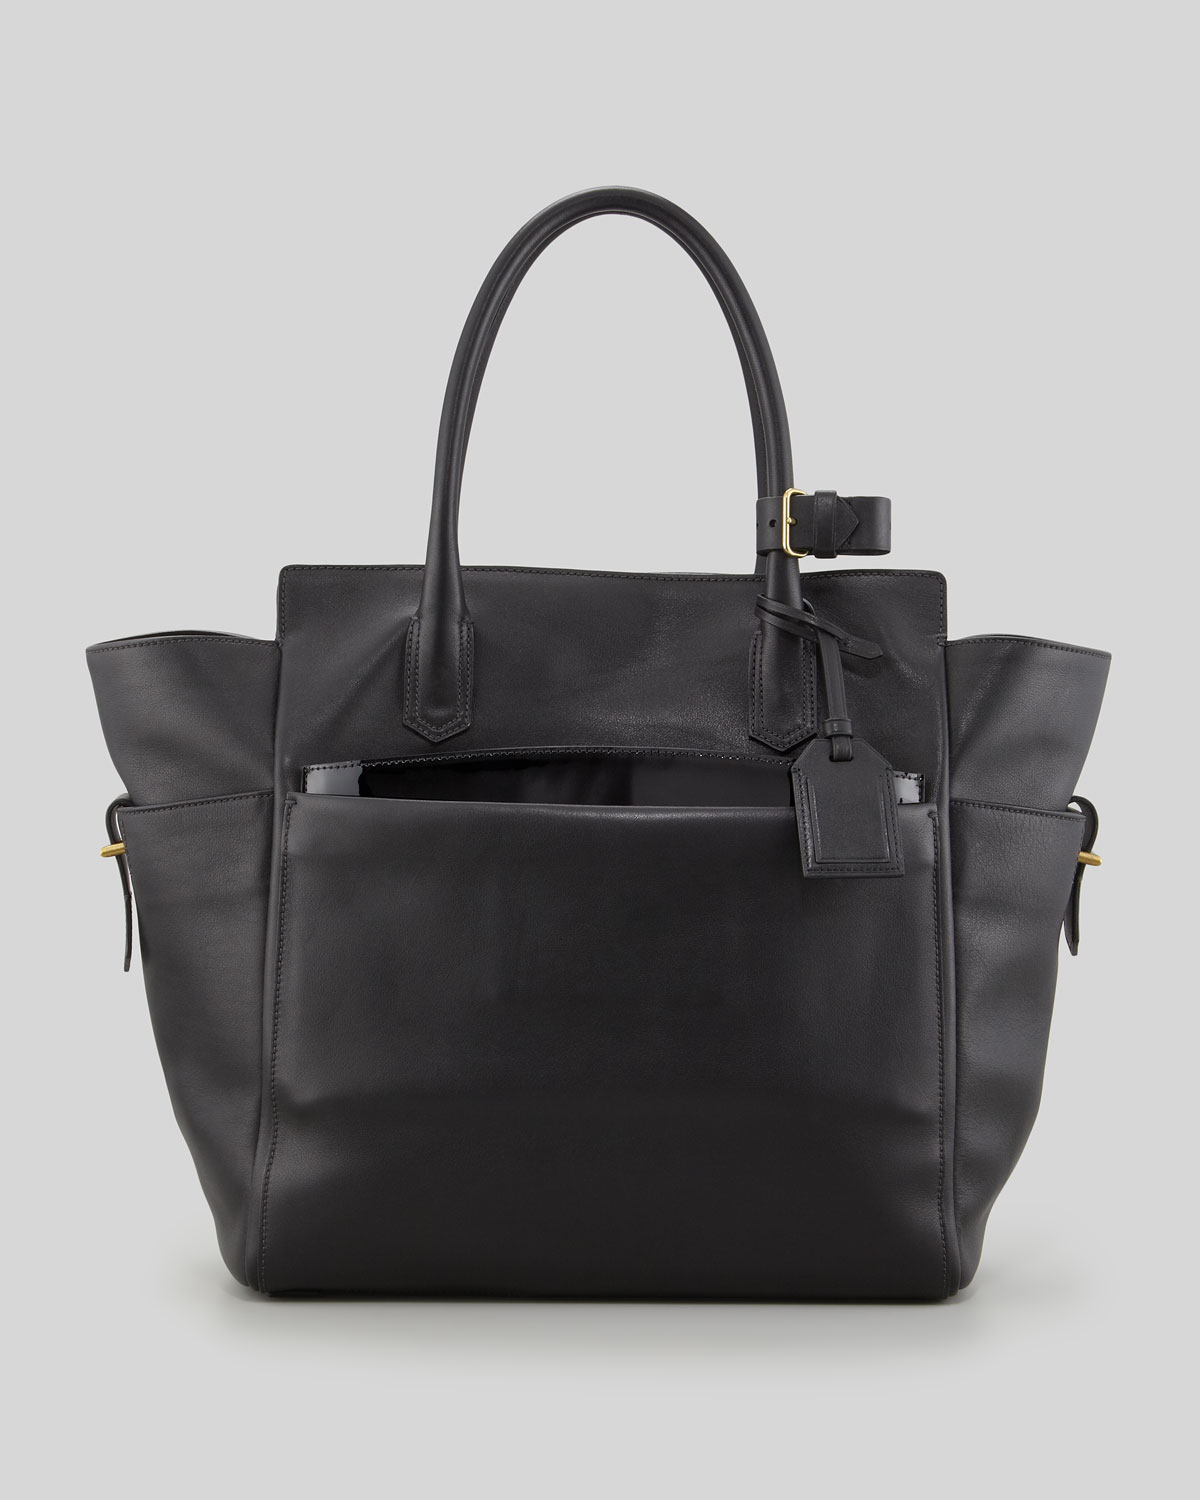 Reed Krakoff Atlantique Tote Bag with Patent Pouch Black in Black | Lyst